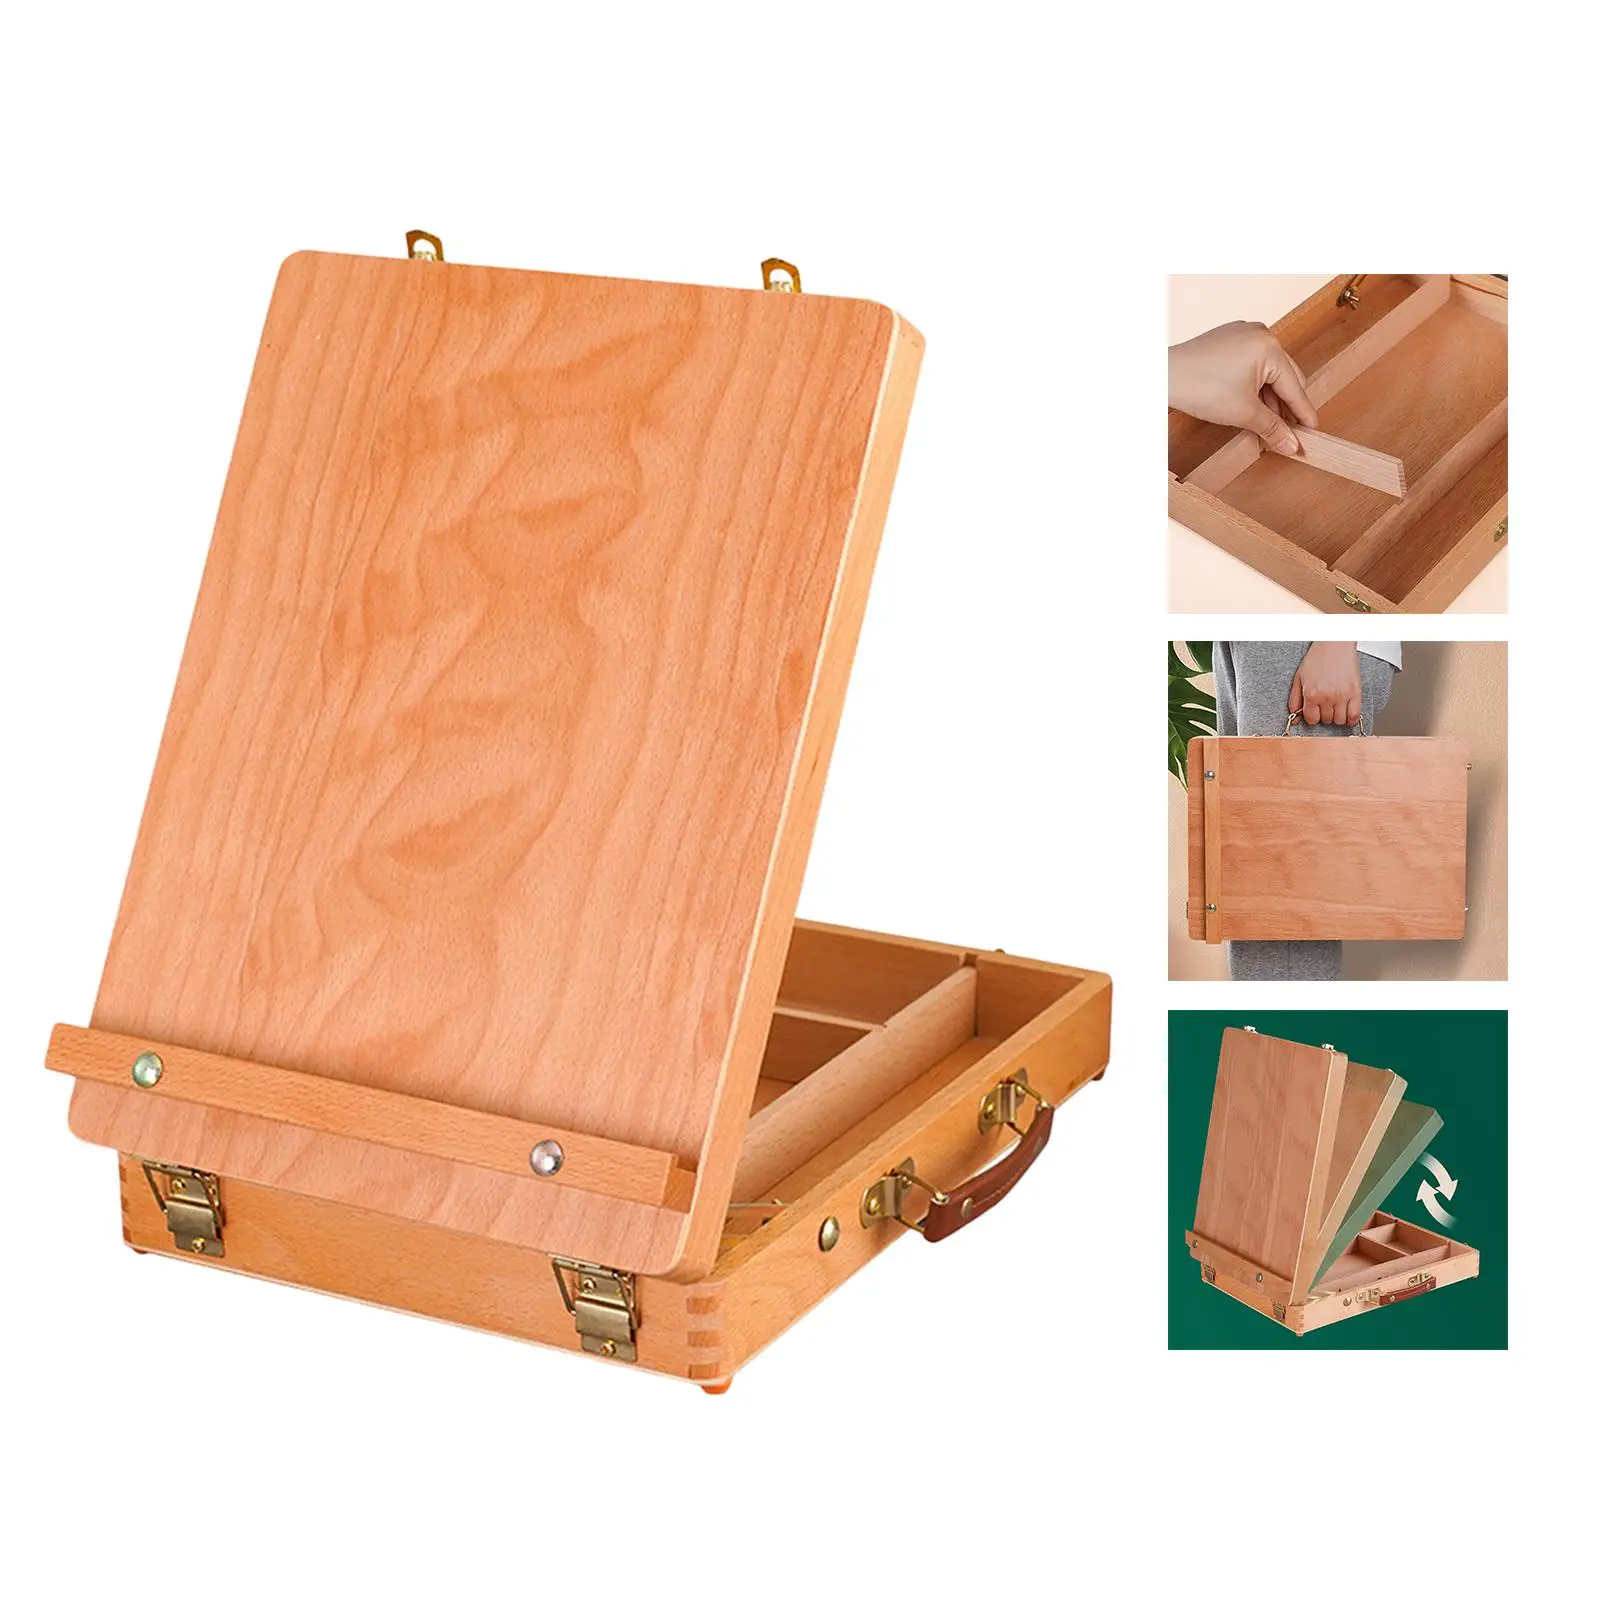 Adjustable Wood Table Easel Portable Wooden Artist Desktop Storage Case for Drawing Painting Art Supplies